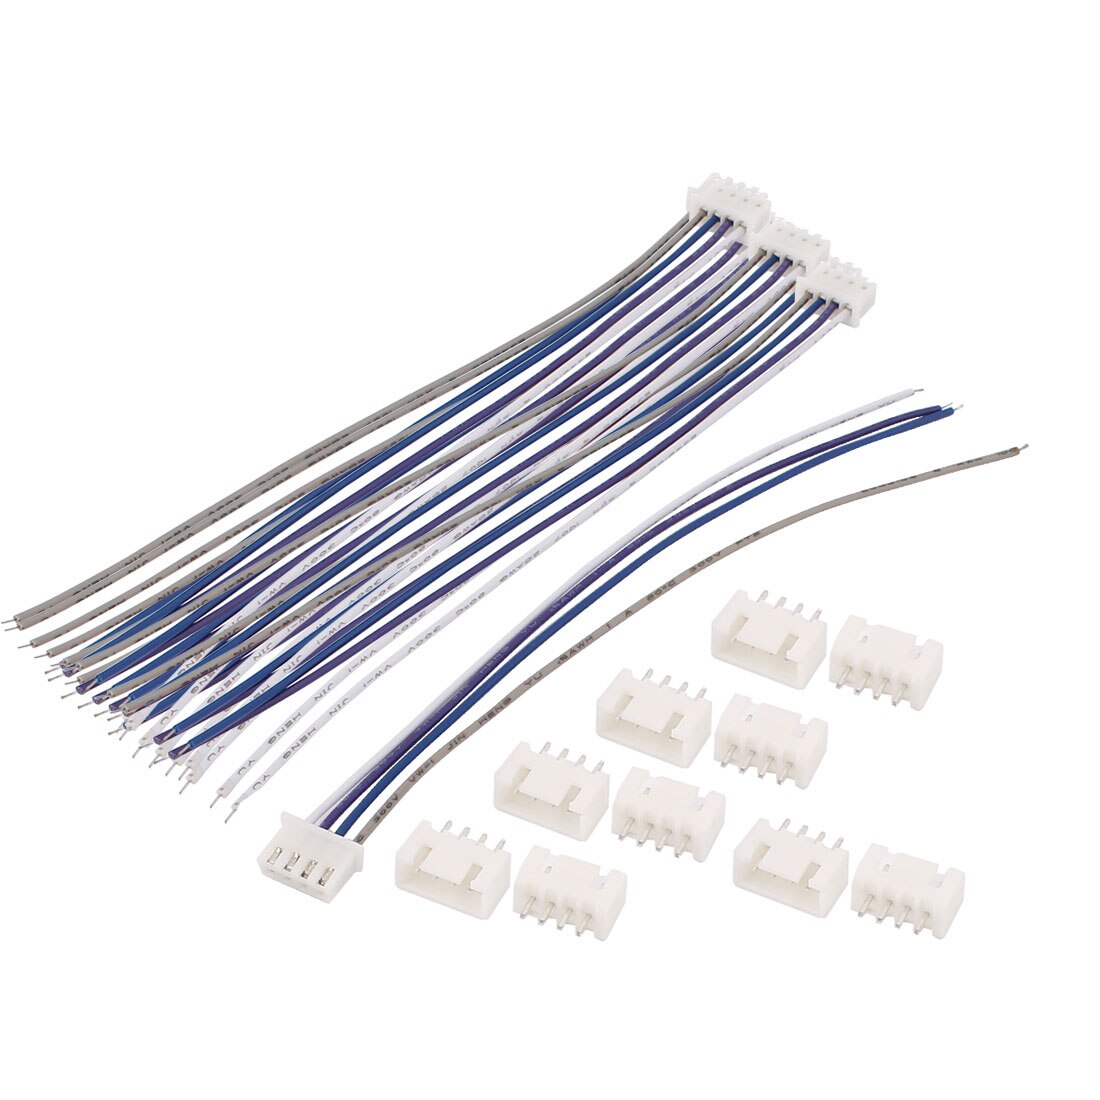 UXCELL Jst Xh2.5 4-Pin Plug Balance Connector Extension Wire Set Voor 3 S 11.1 V Lipo Batterij